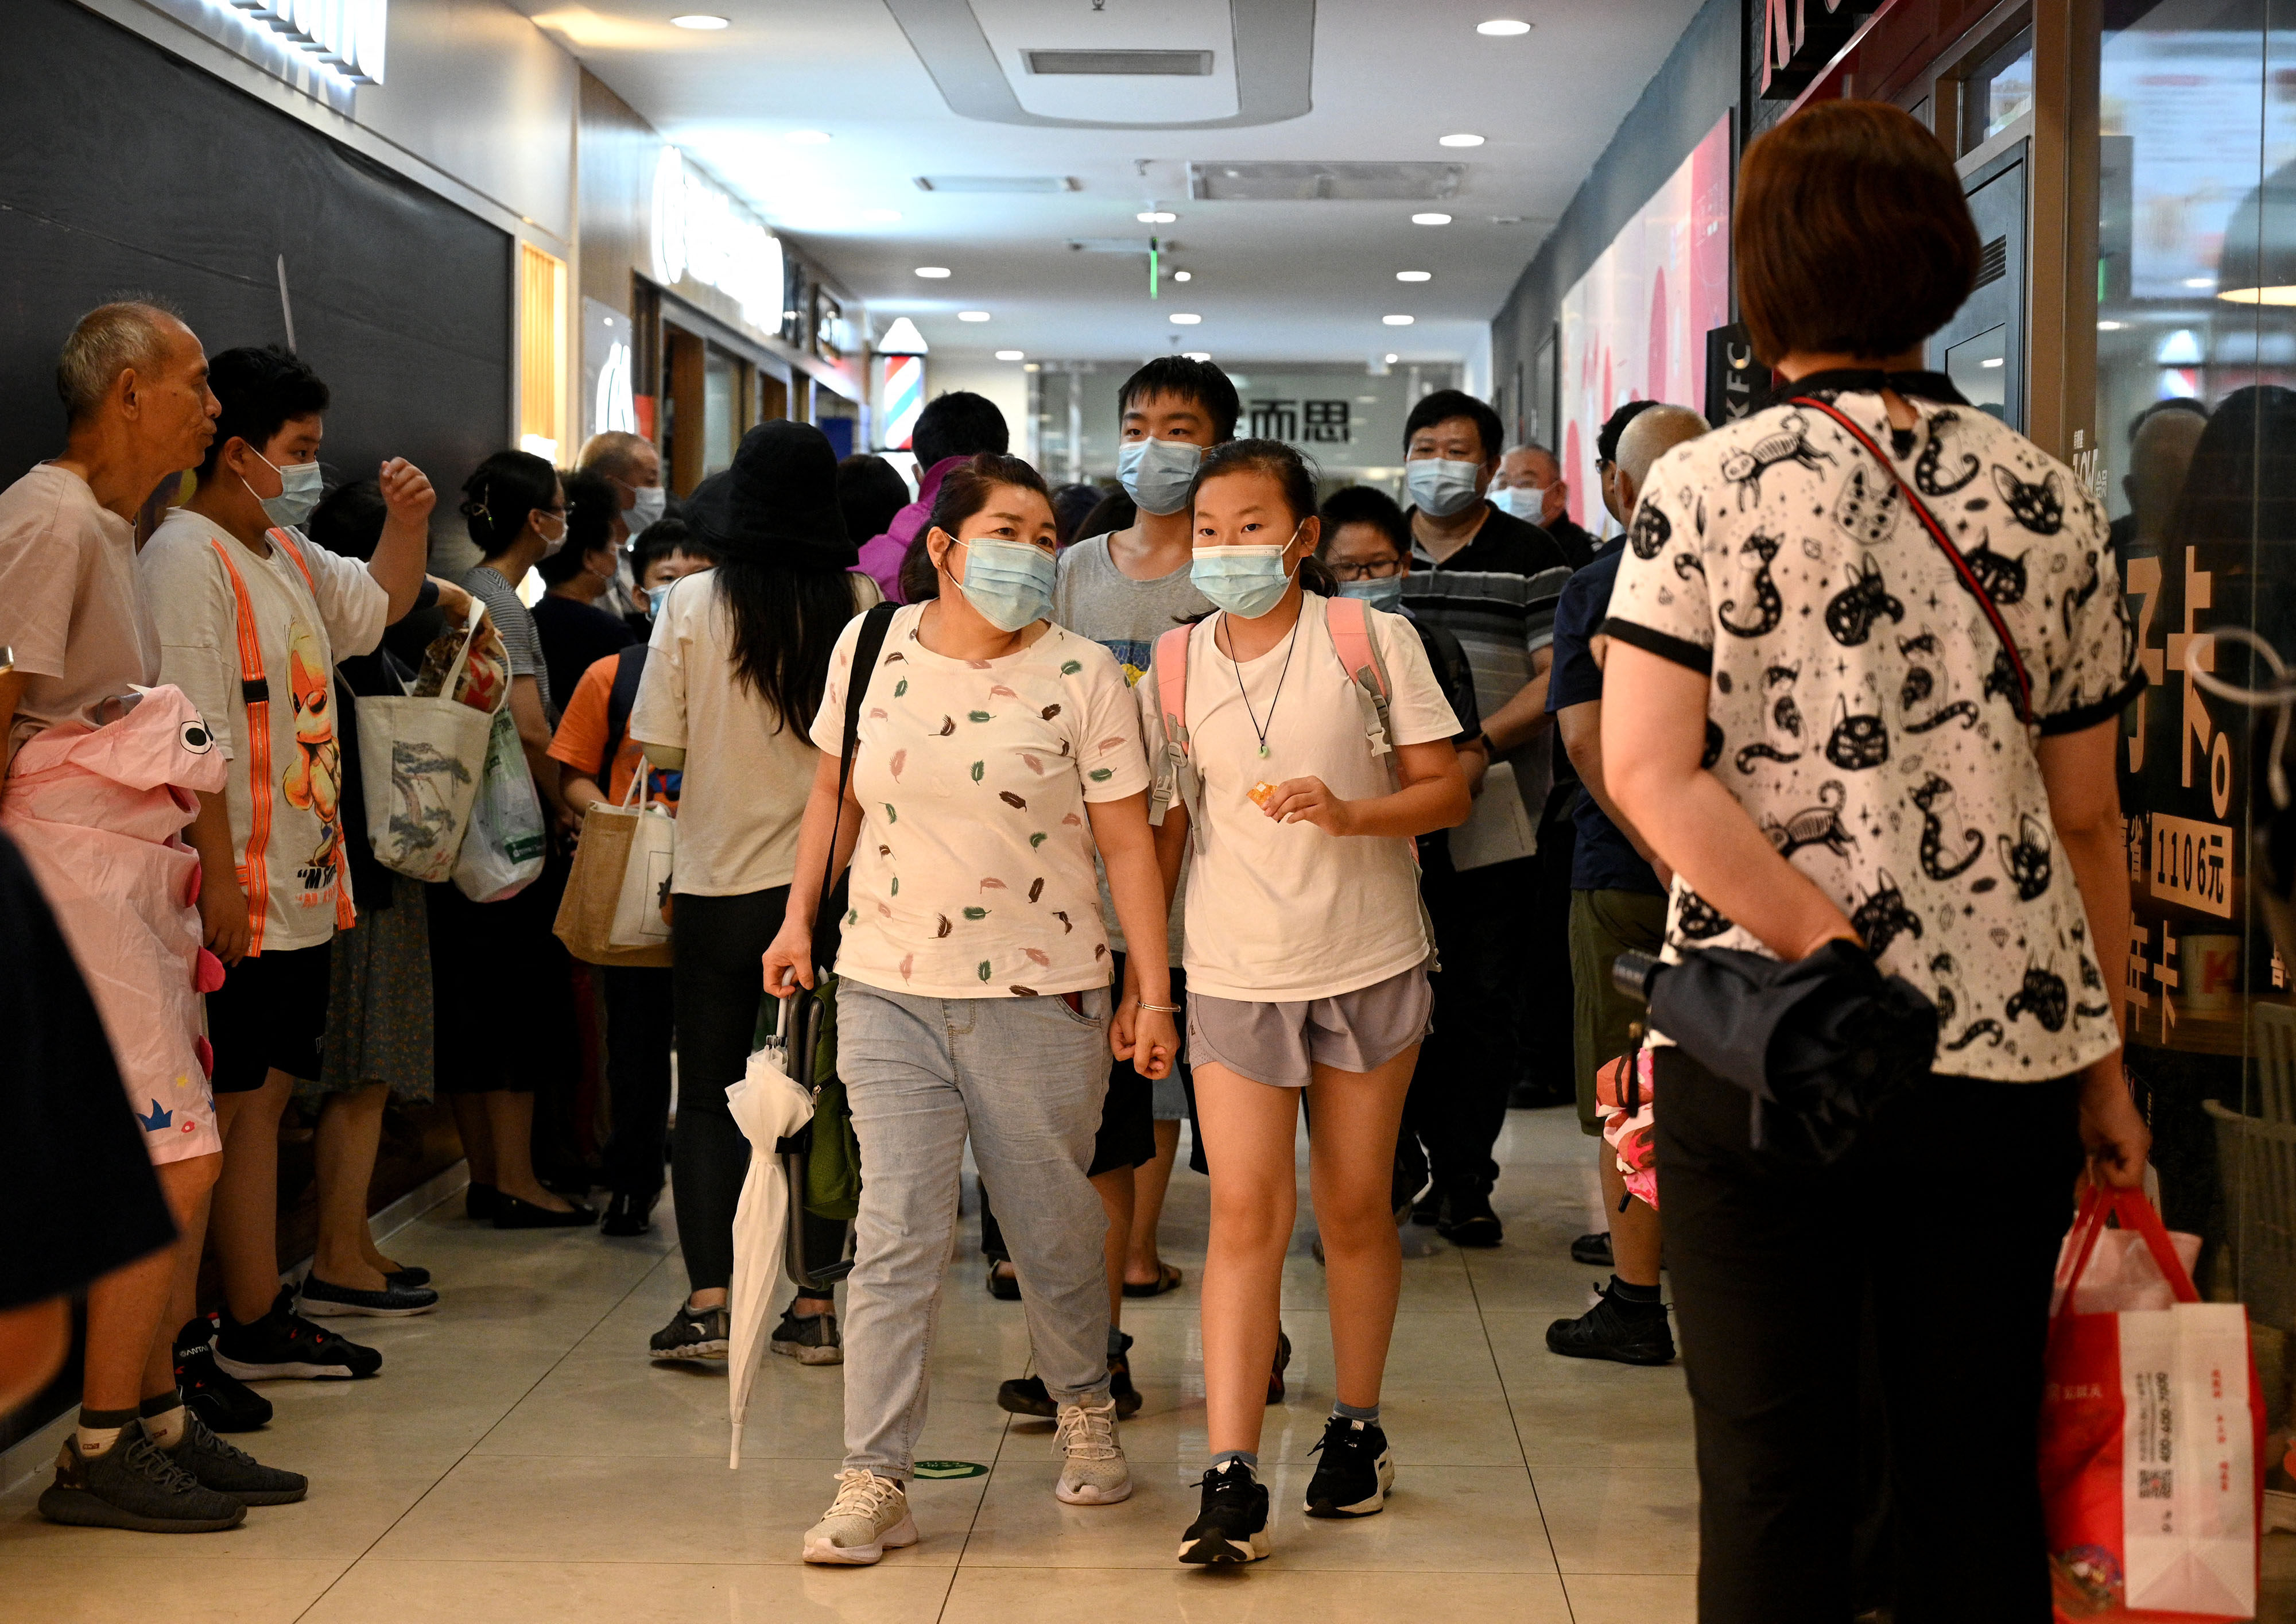 Students and parents come away from a tutoring centre in Beijing’s Haidian district on July 29. China’s crackdown on after-school tutoring has affected the market value of education companies. Photo: AFP